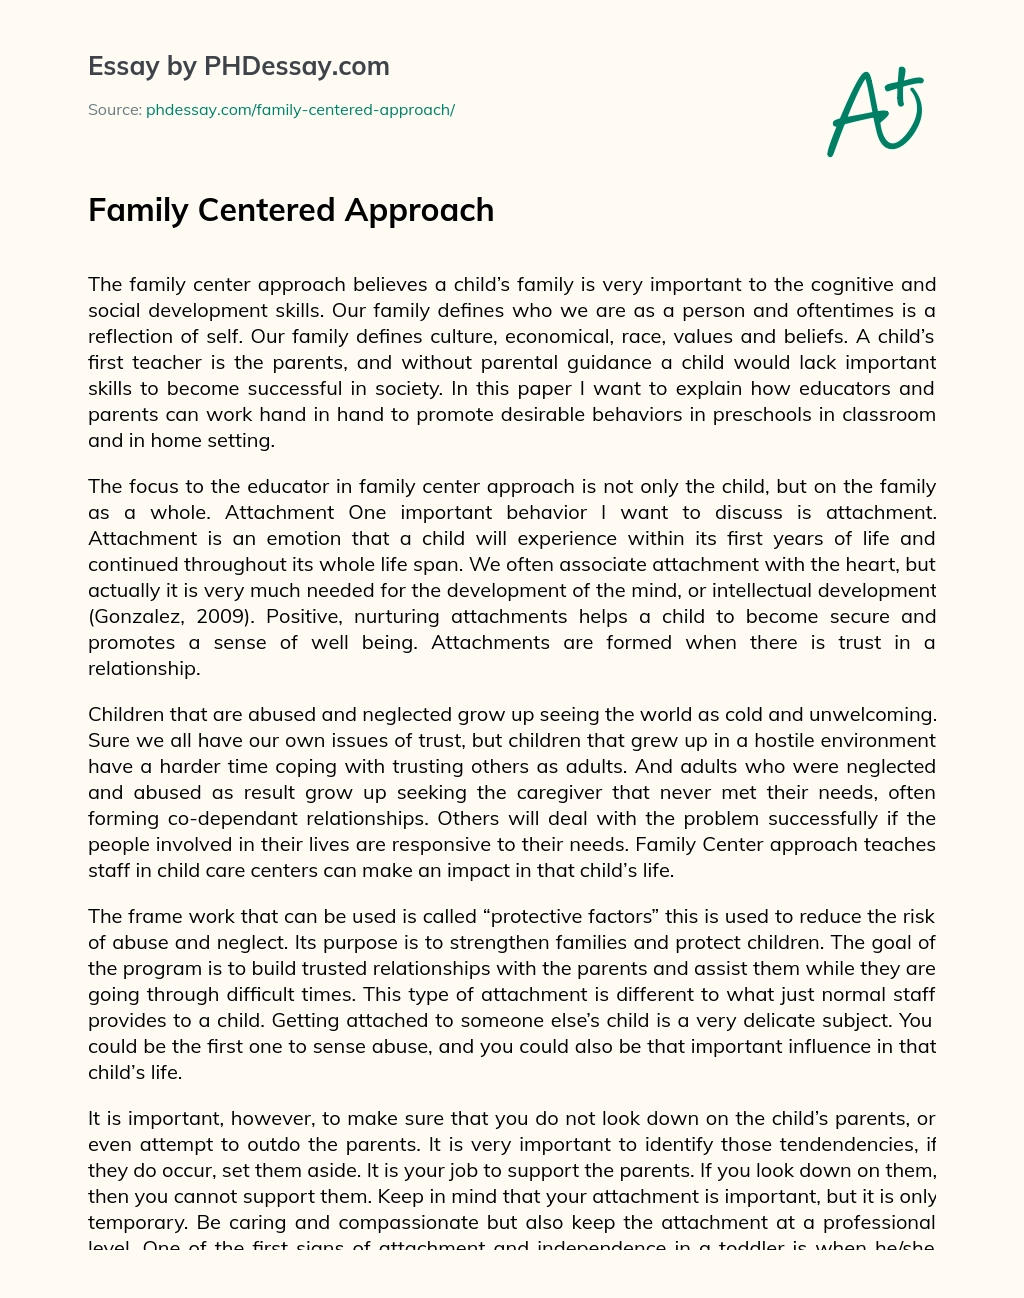 Family Centered Approach essay